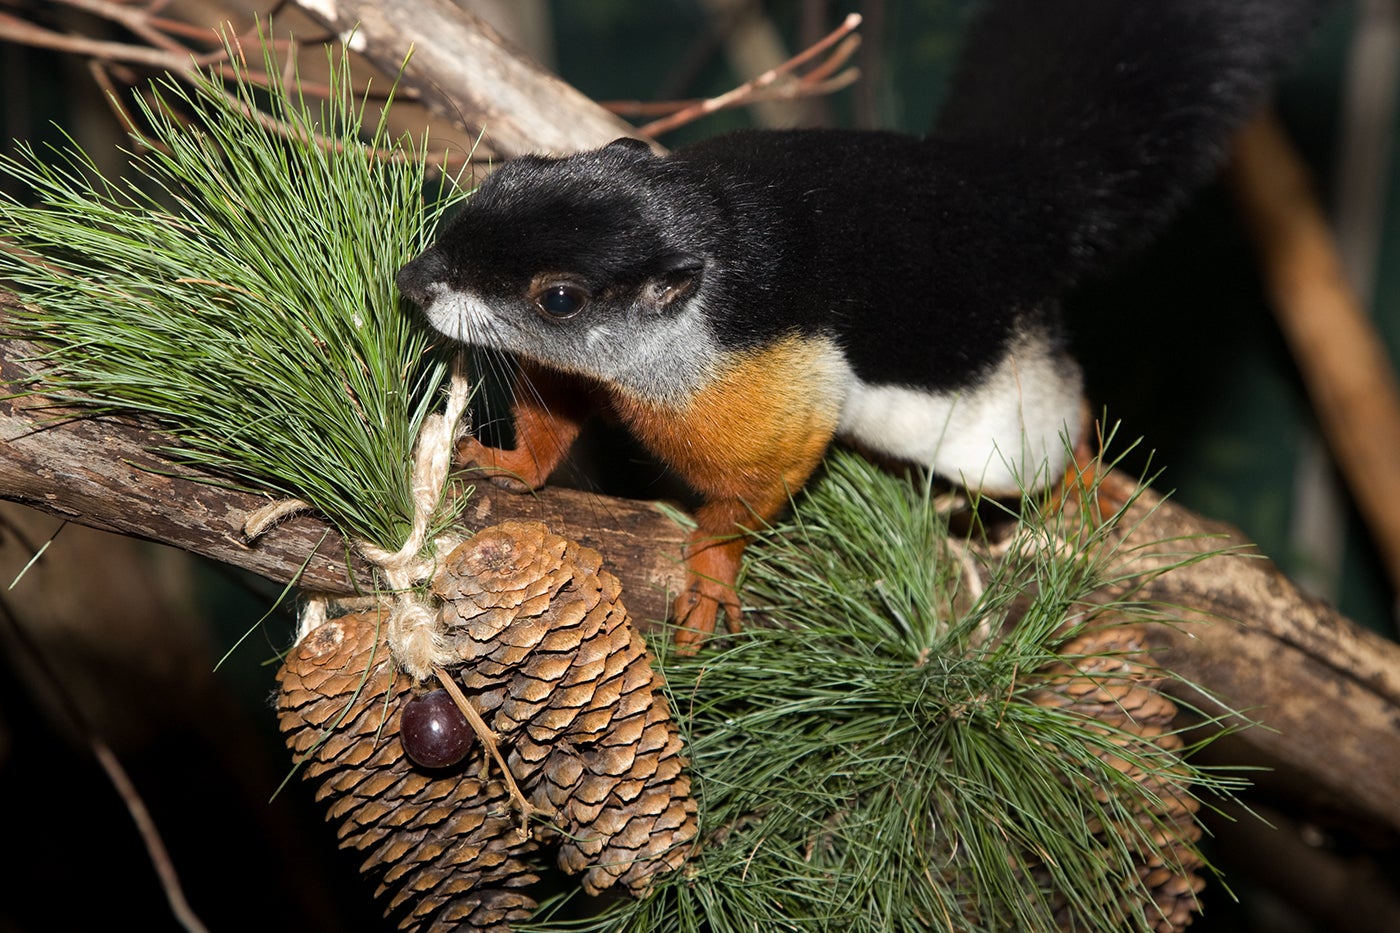 A small squirrel, called a Prevost's squirrel, with whiskers, short pointed ears and a bushy tail perched on a pine tree branch. Its thick fur is black, white and brown-red.